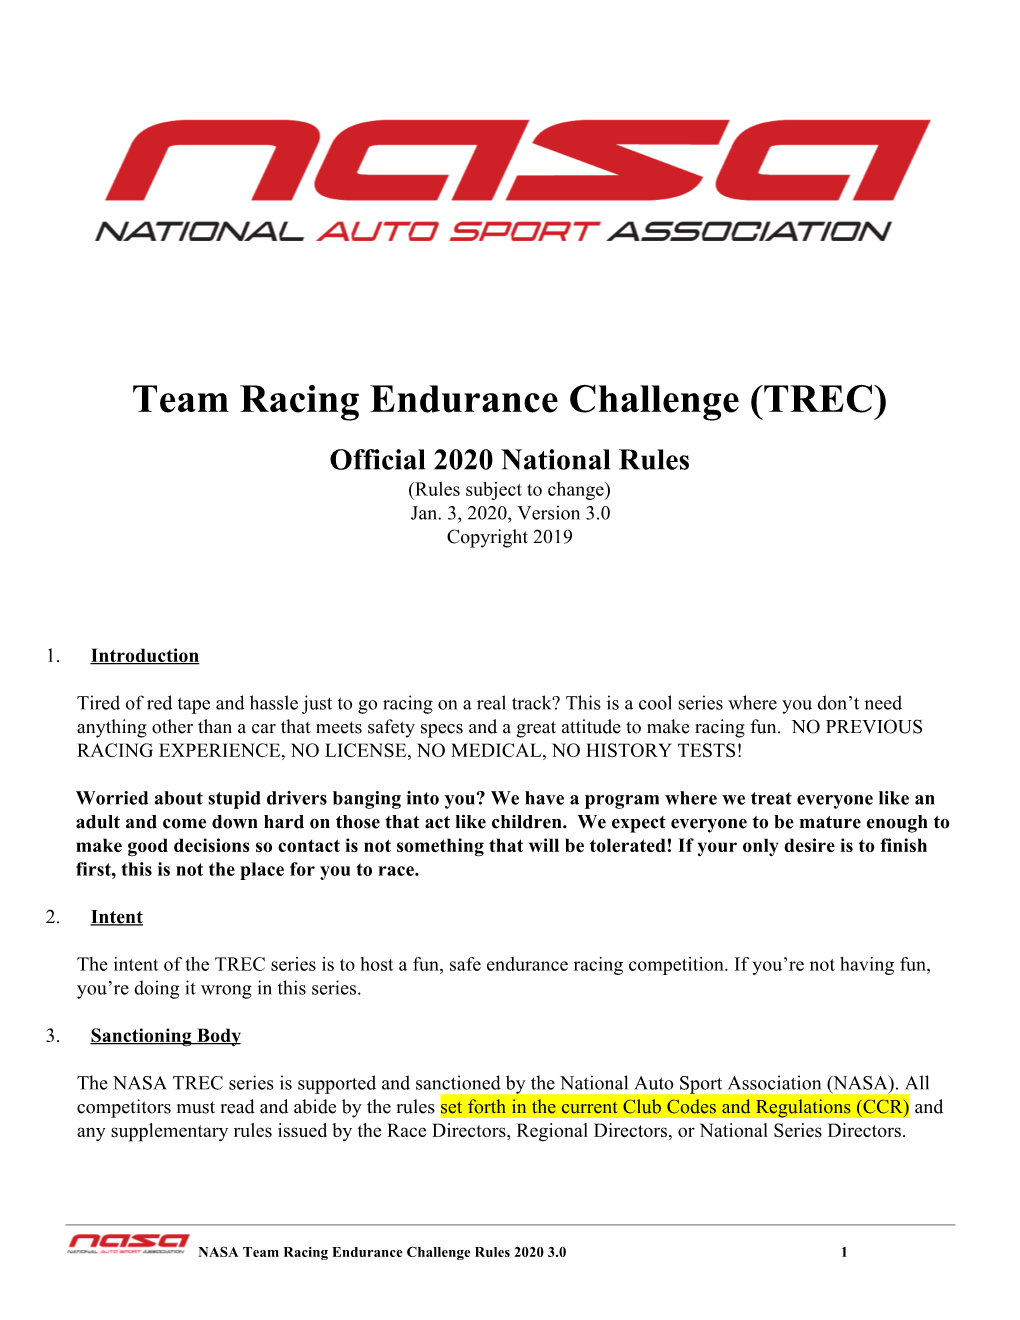 TREC) Official 2020 National Rules (Rules Subject to Change) Jan